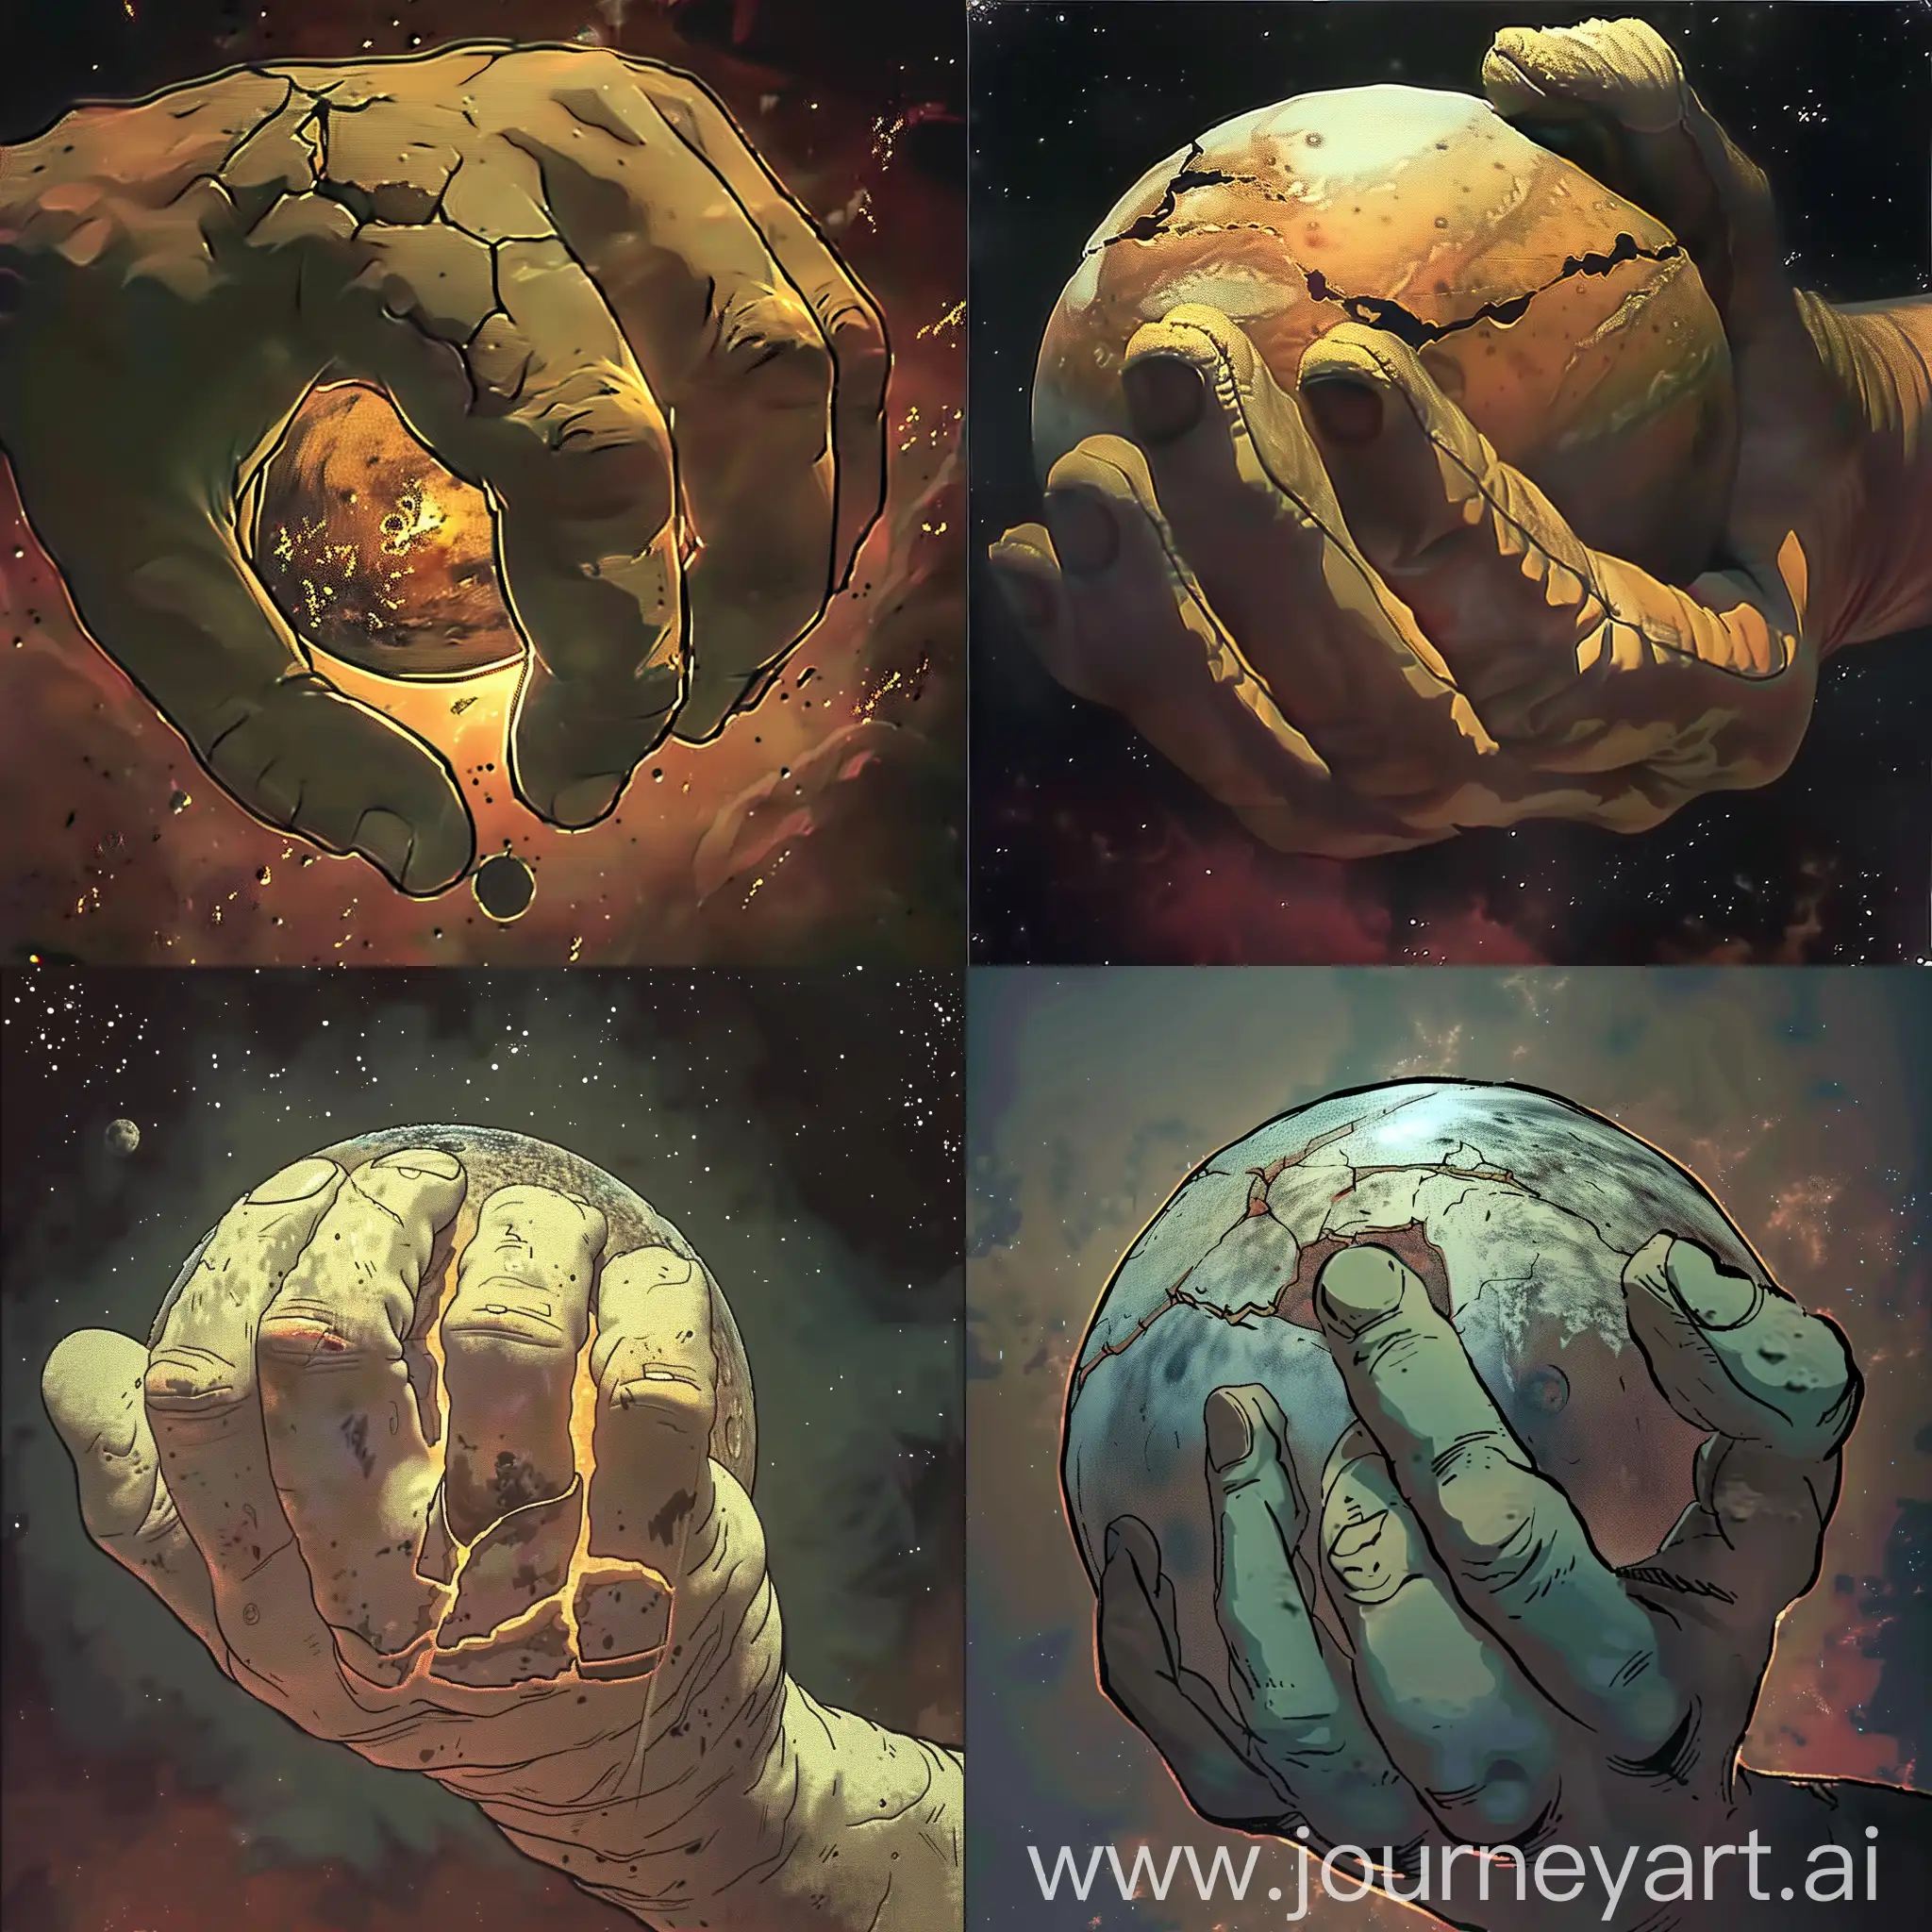 Epic-Anime-Illustration-Planet-Gripped-by-Enormous-Claw-in-Stunning-Animation